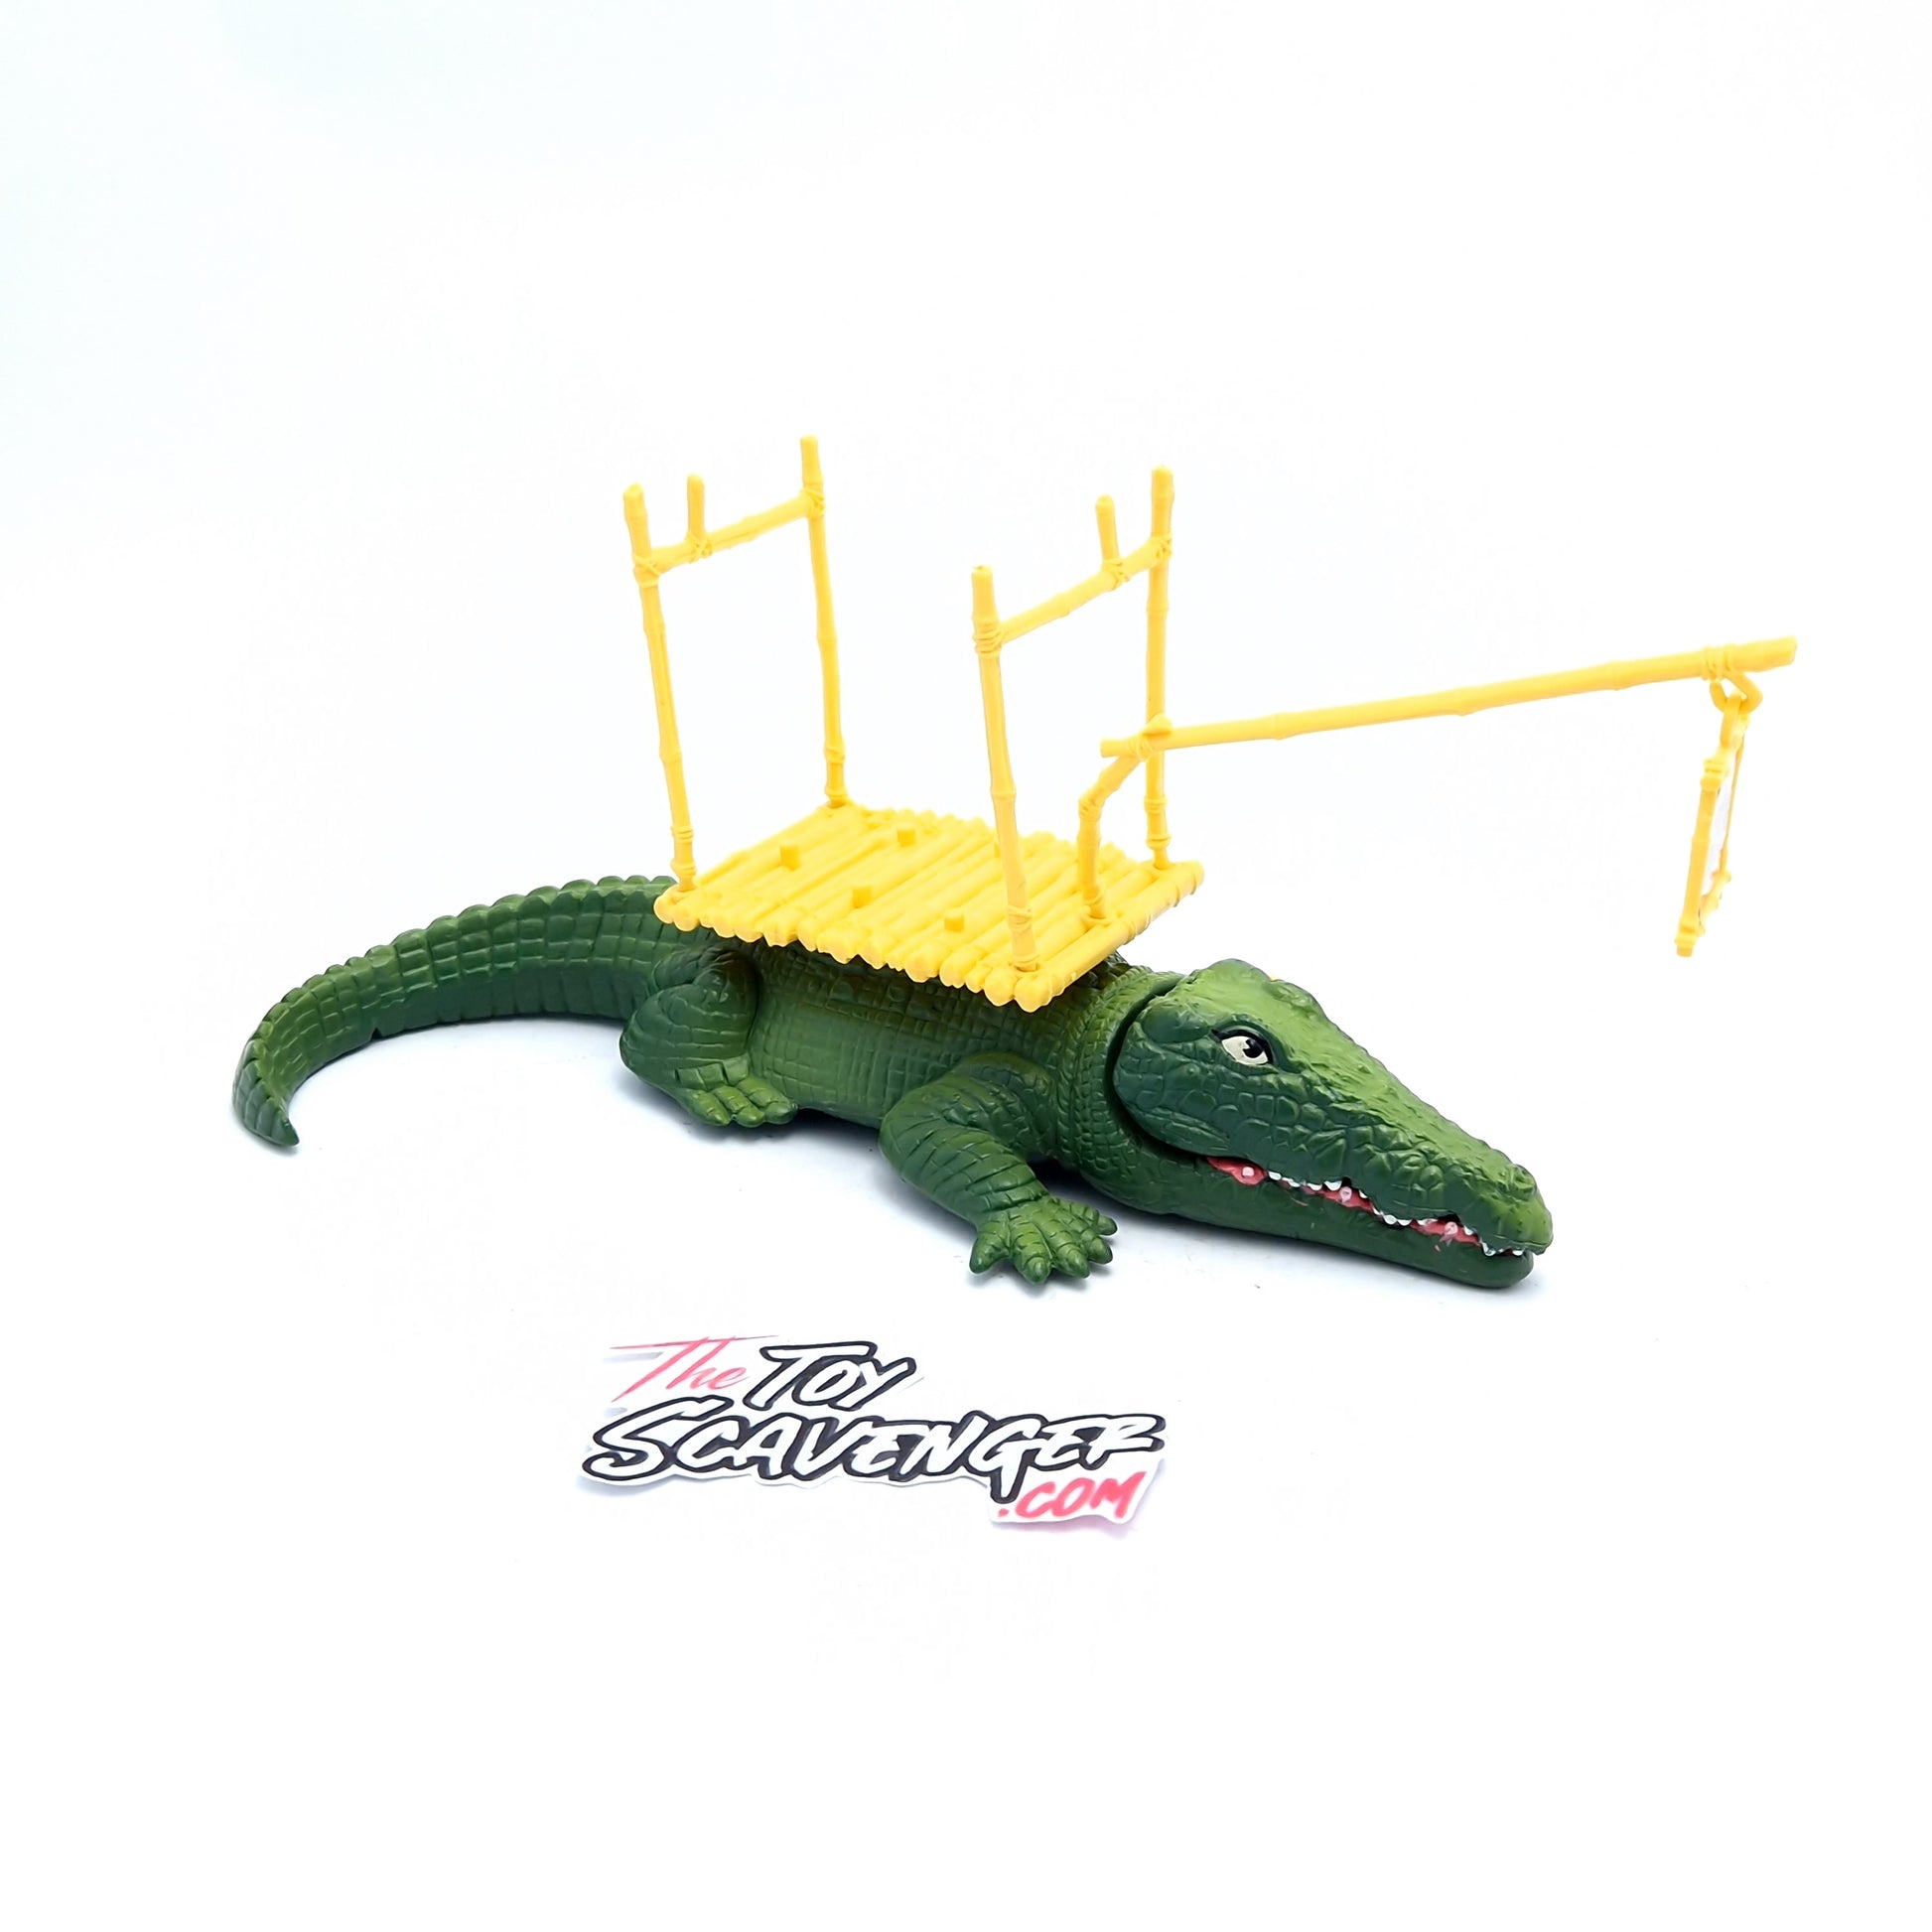 HOOK MOVIE ☆ DELUXE LOST BOYS ATTACK CROC Action Figure ☆ Loose 90's M –  The Toy Scavenger Ltd